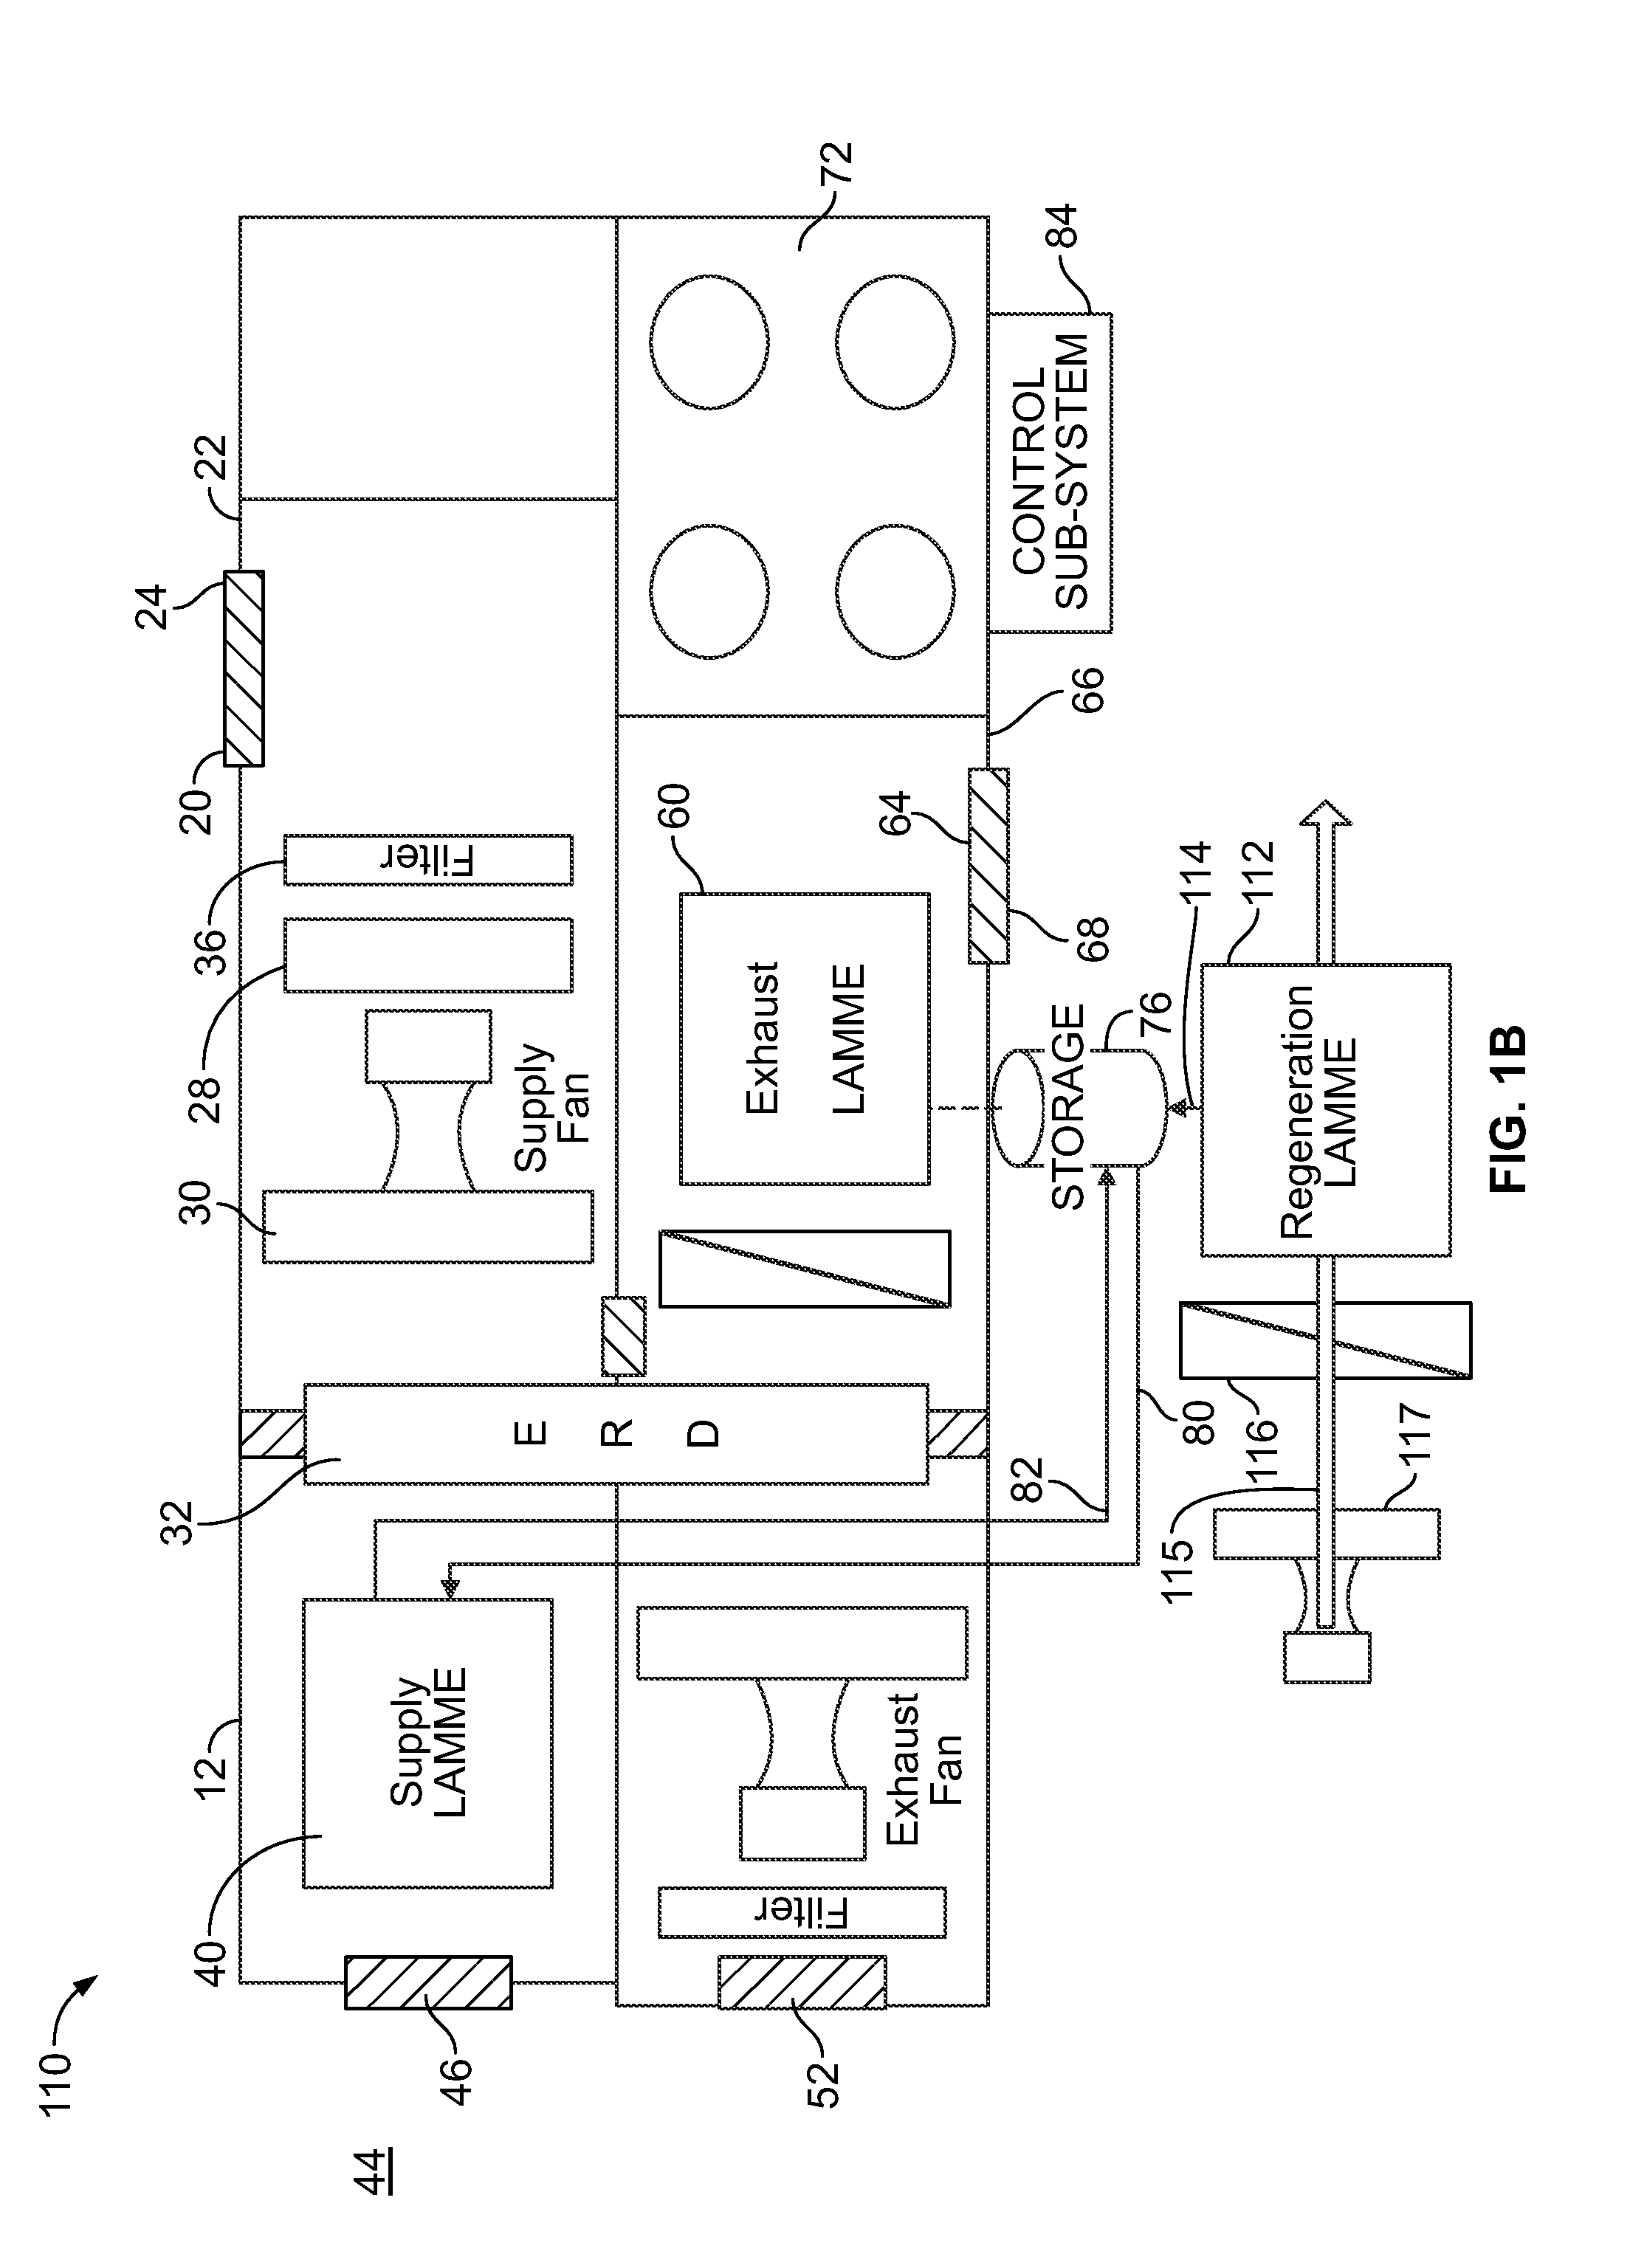 Control system and method for a liquid desiccant air delivery system